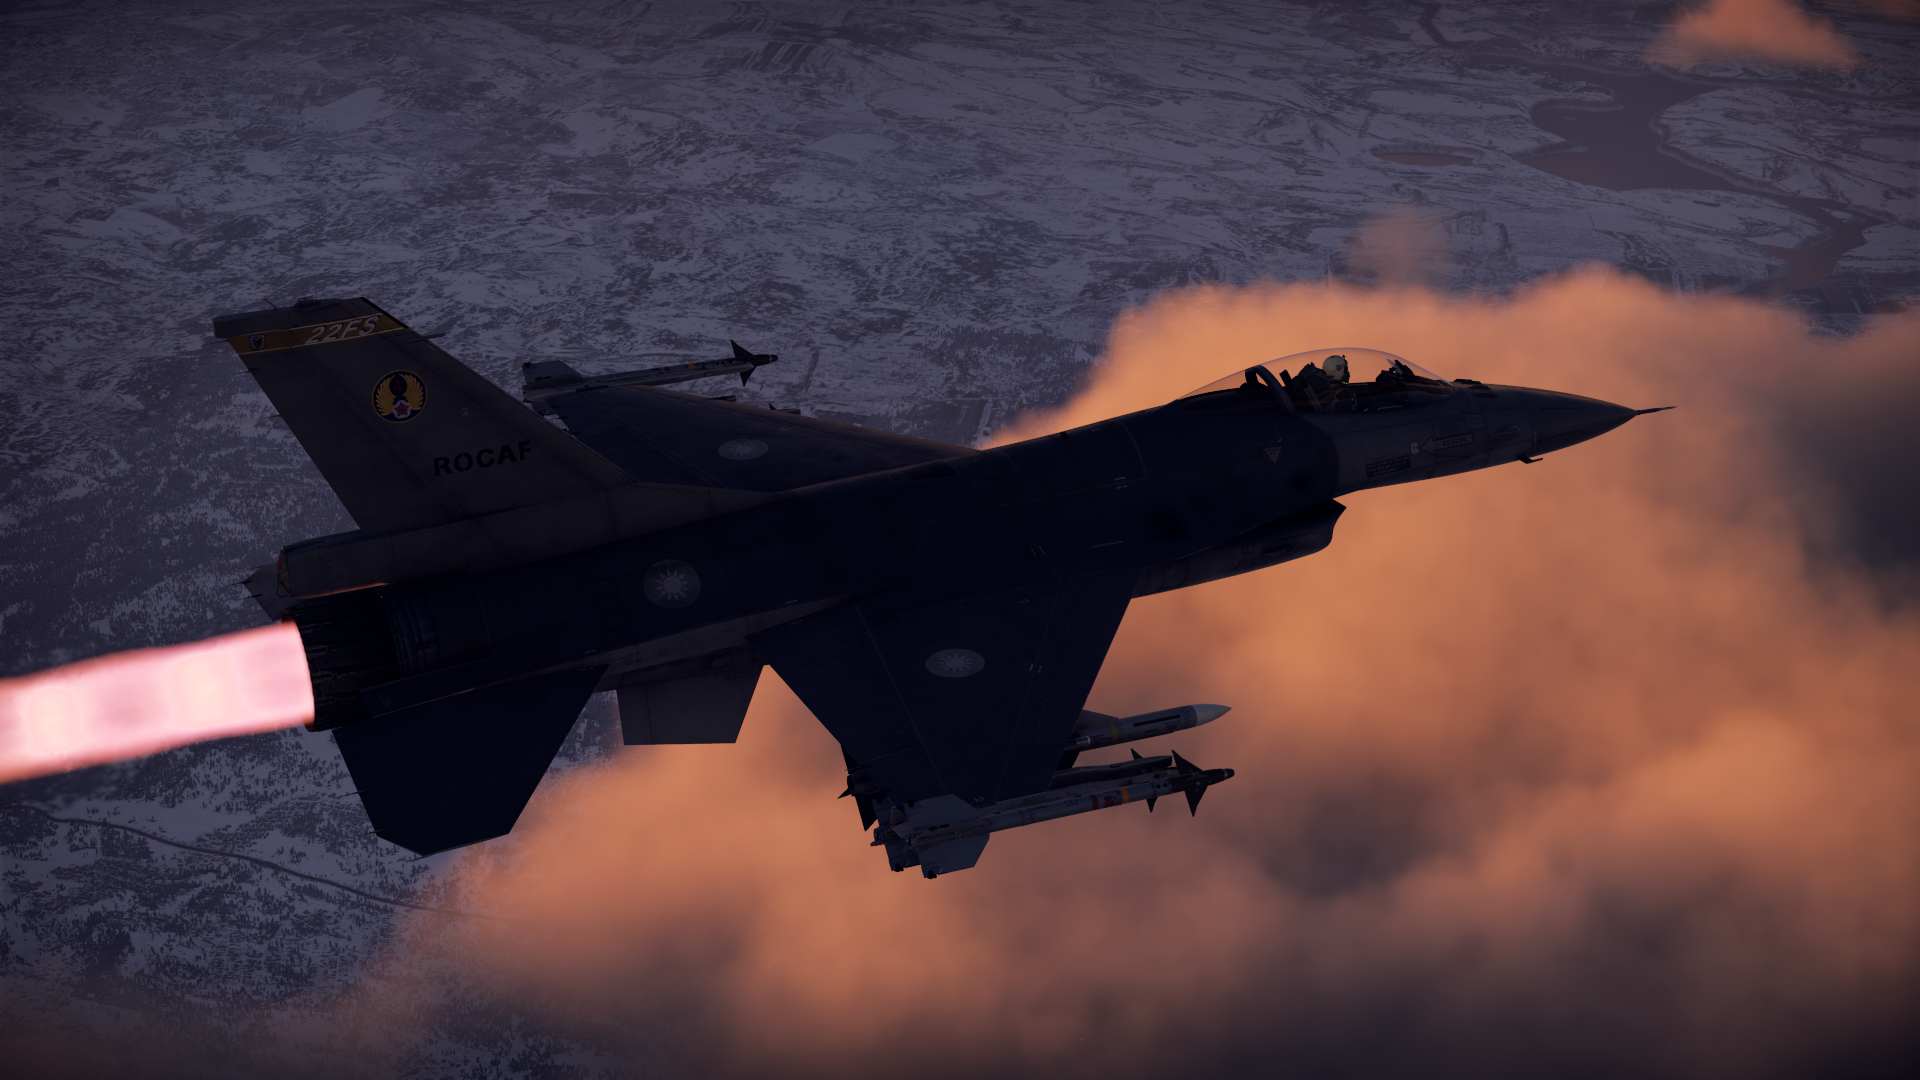 General 1920x1080 War Thunder General Dynamics F-16 Fighting Falcon Taiwanese Air Force jet fighter airplane sunset video games clouds sky CGI sunset glow aircraft screen shot afterburner